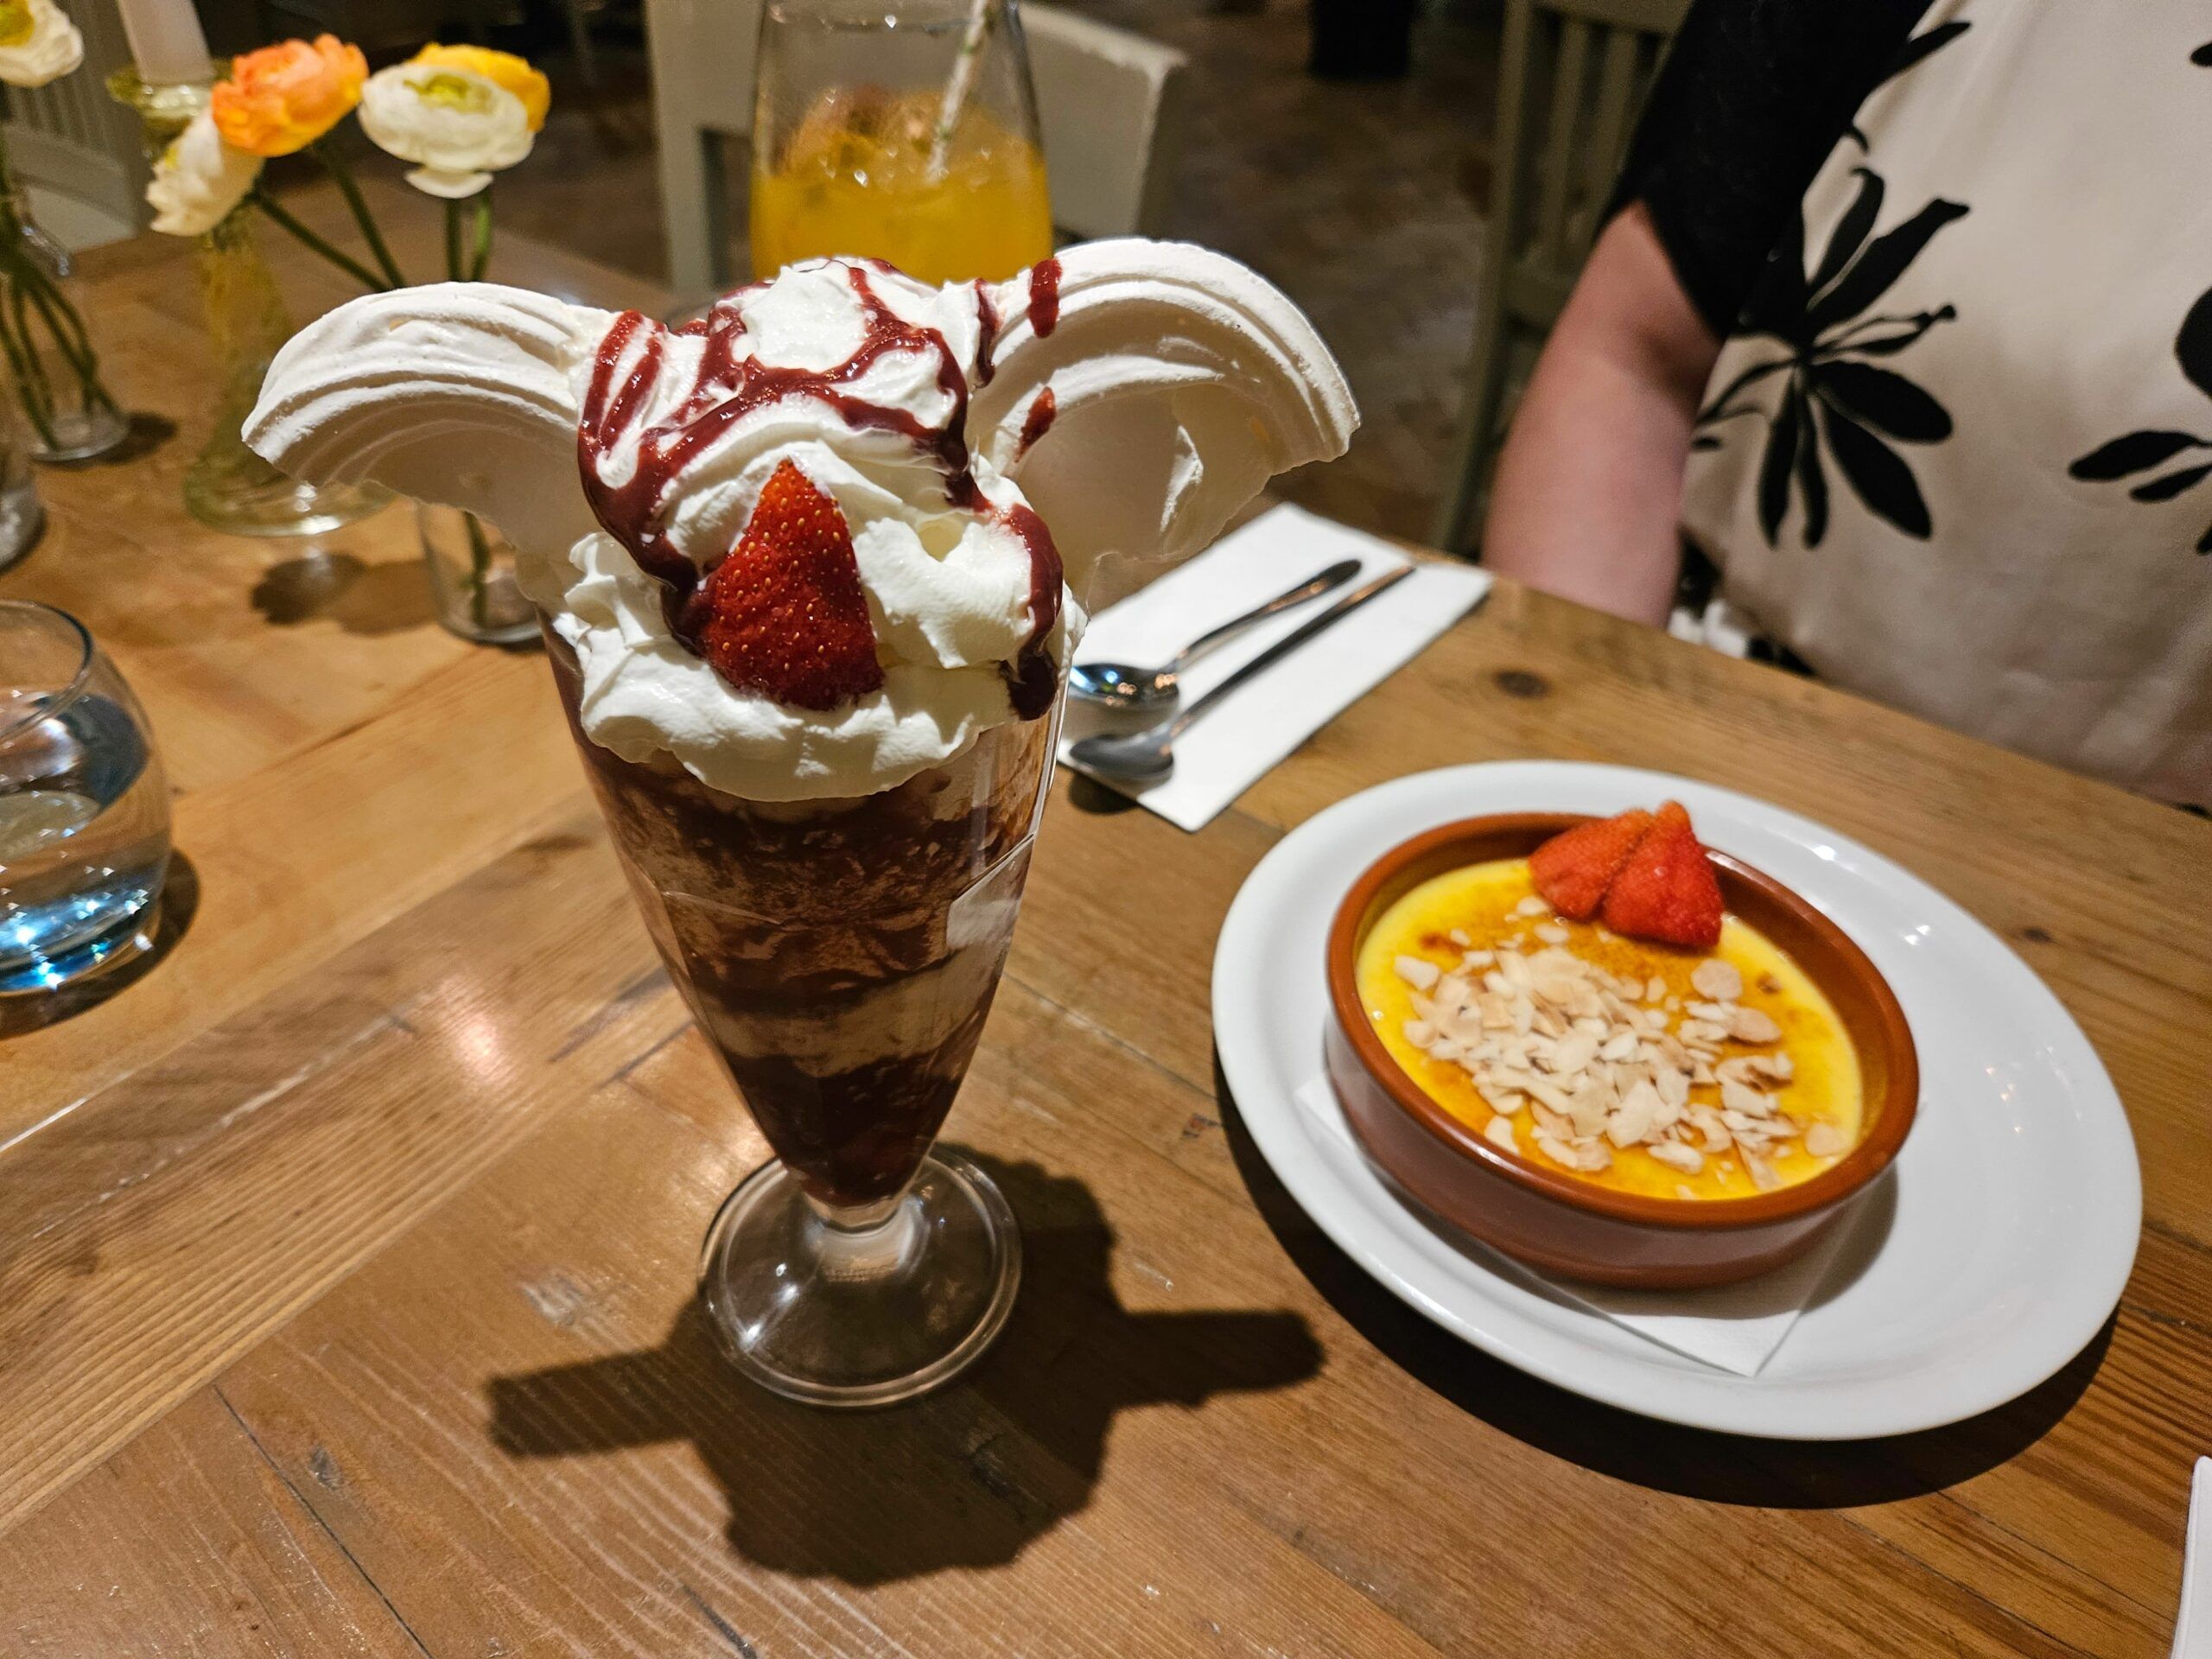 crème brûlée topped with sliced almonds and fresh strawberries and sundae glass piled high with fresh whipped cream, sliced strawberries, drizzled with raspberry sauce and filled with strawberry ice cream. Friday Night